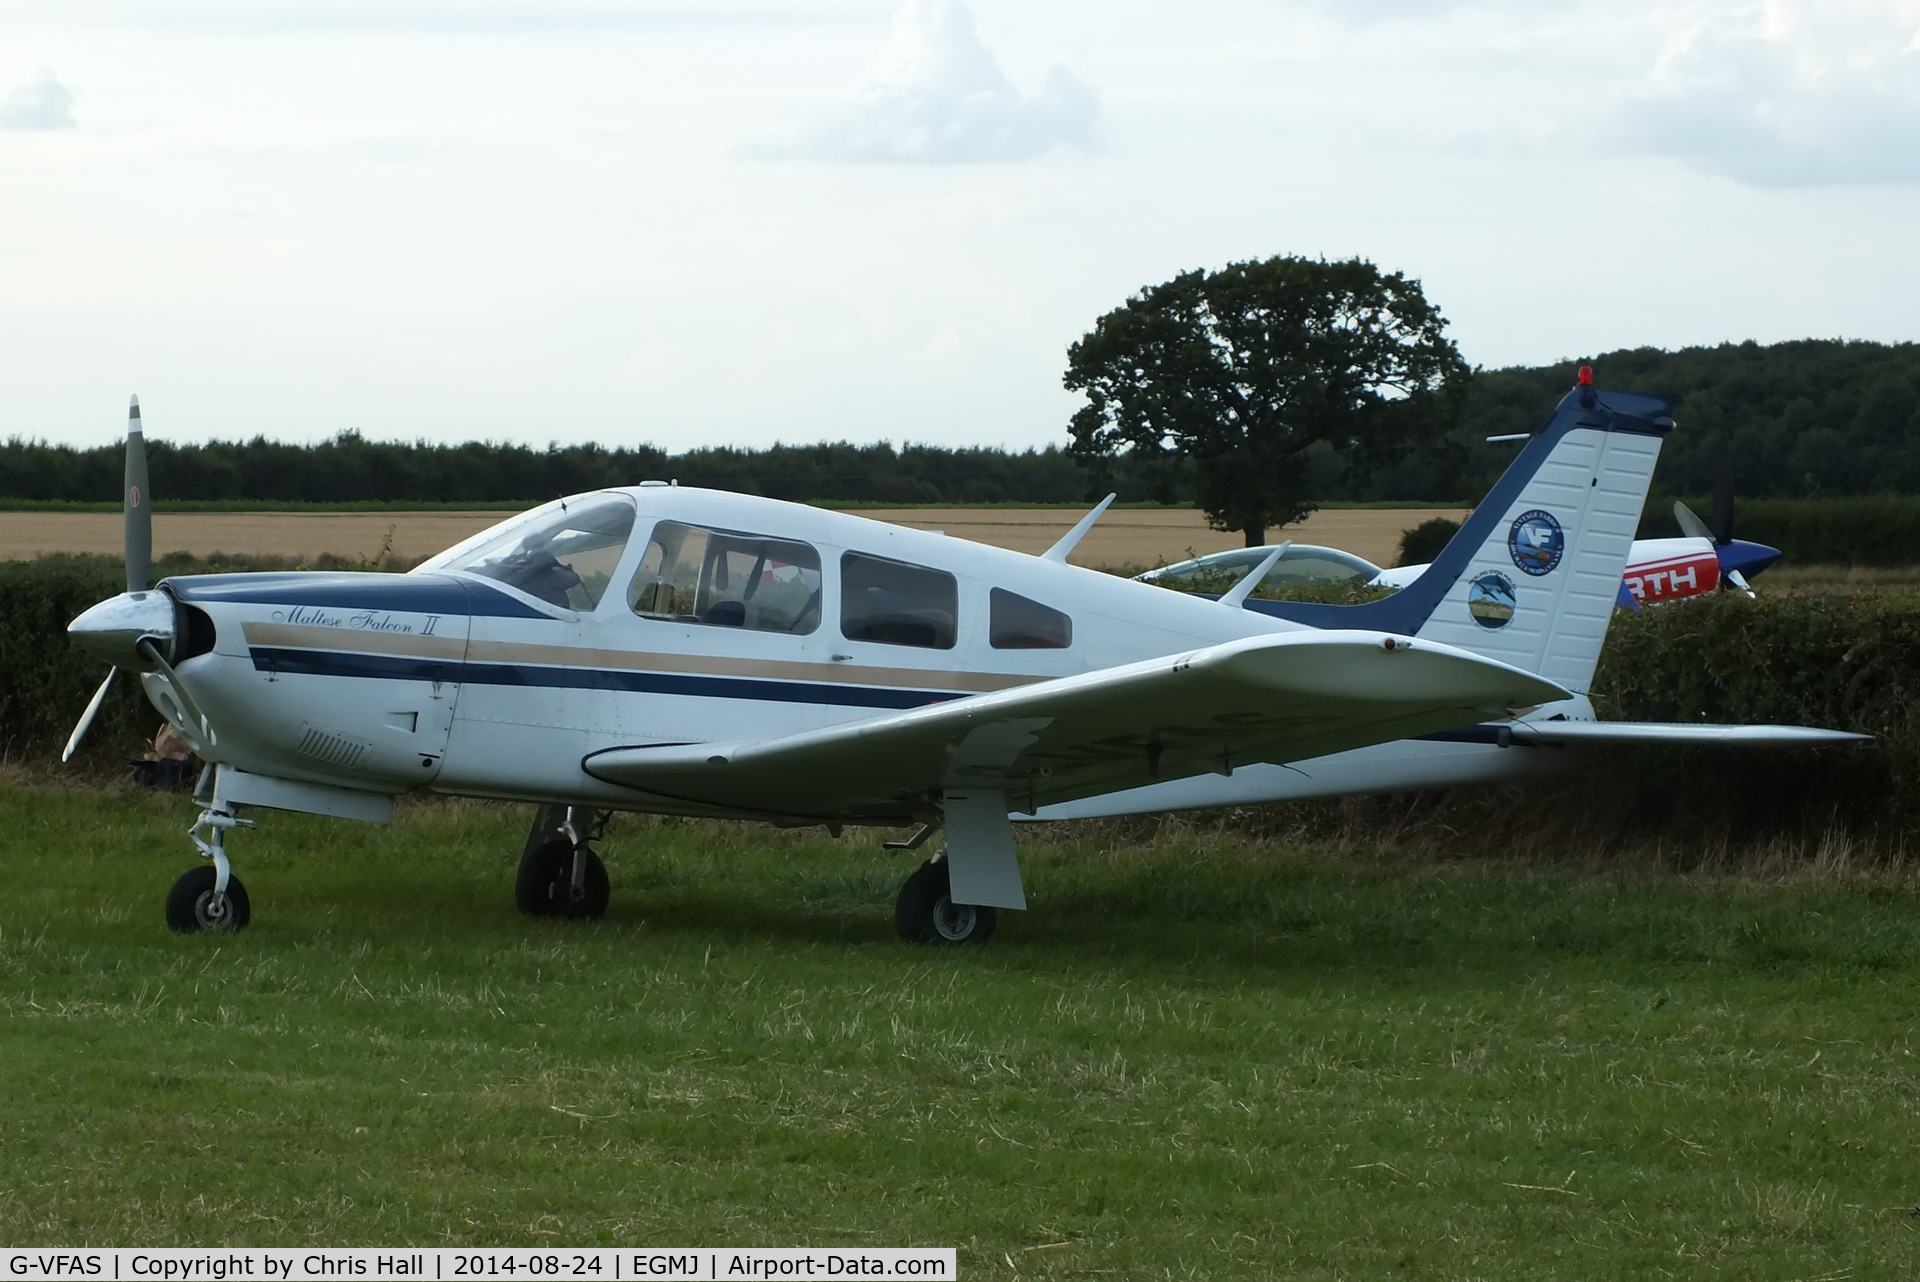 G-VFAS, 1974 Piper PA-28R-200 Cherokee Arrow C/N 28R-7435104, at the Little Gransden Airshow 2014